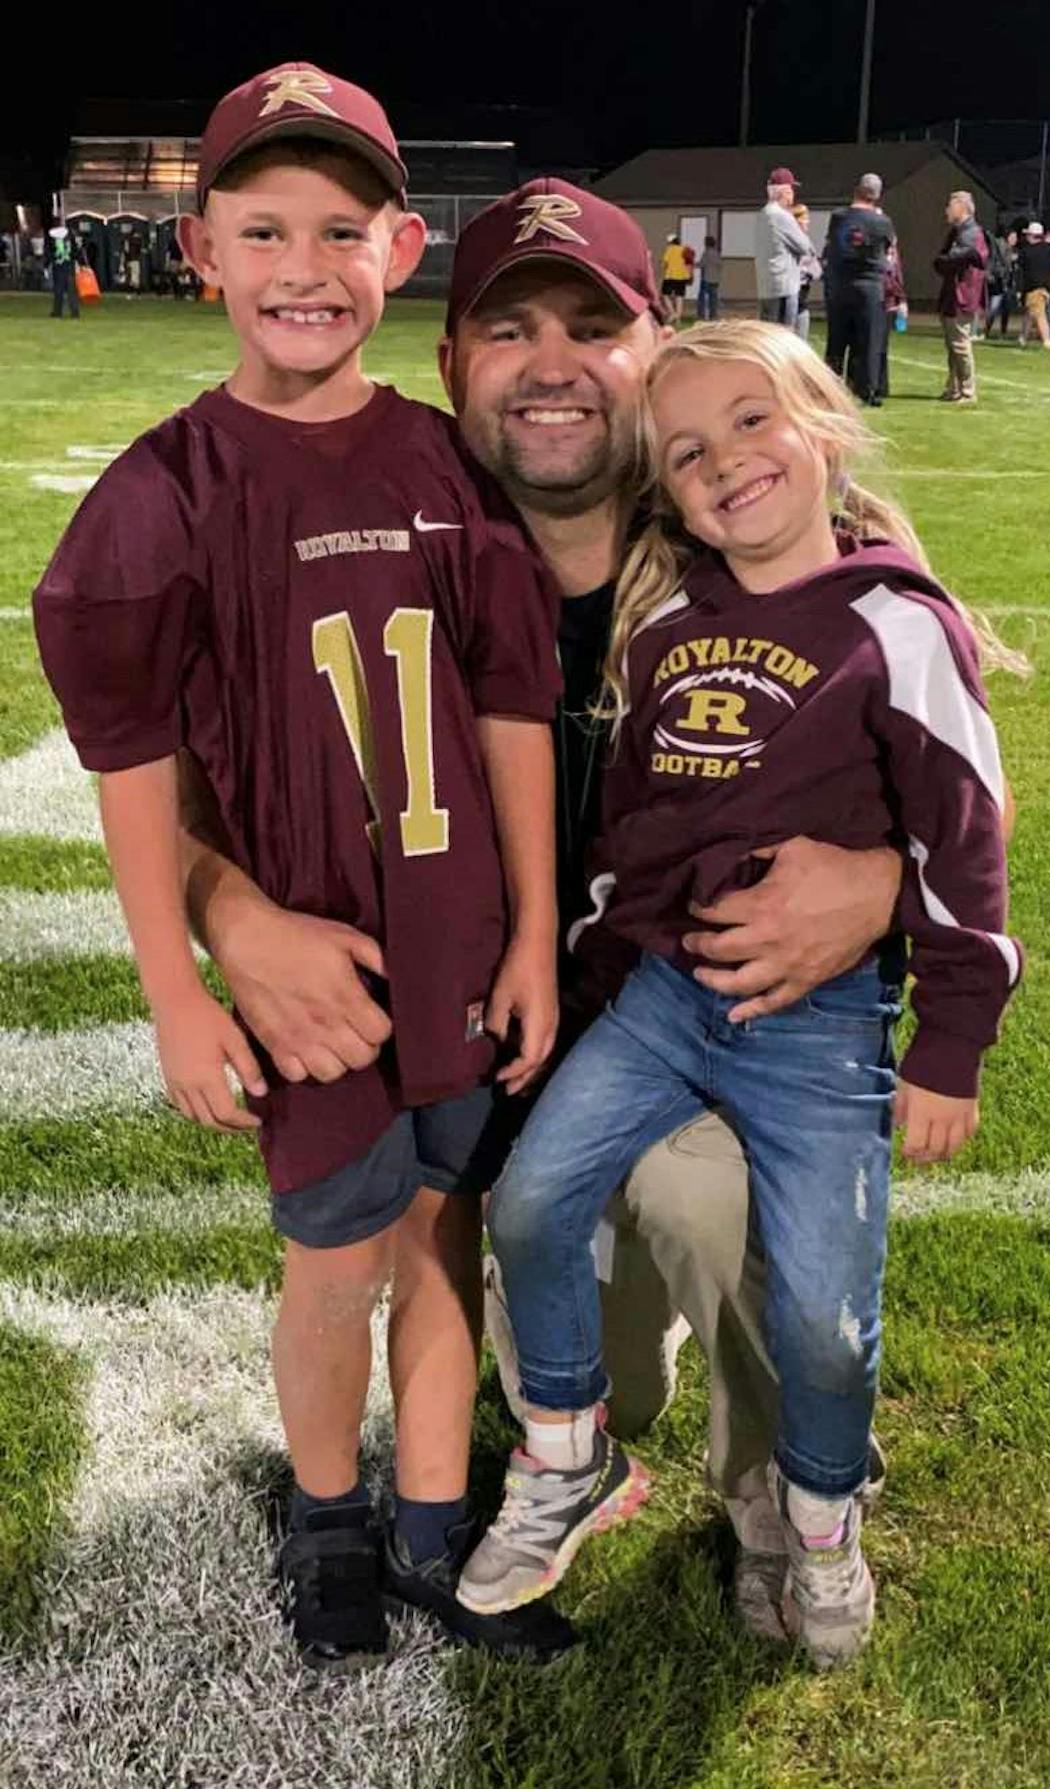 Nick Lanners with his children, Emery and Grayson. Grayson is wearing the No. 11 his dad wore for Royalton.